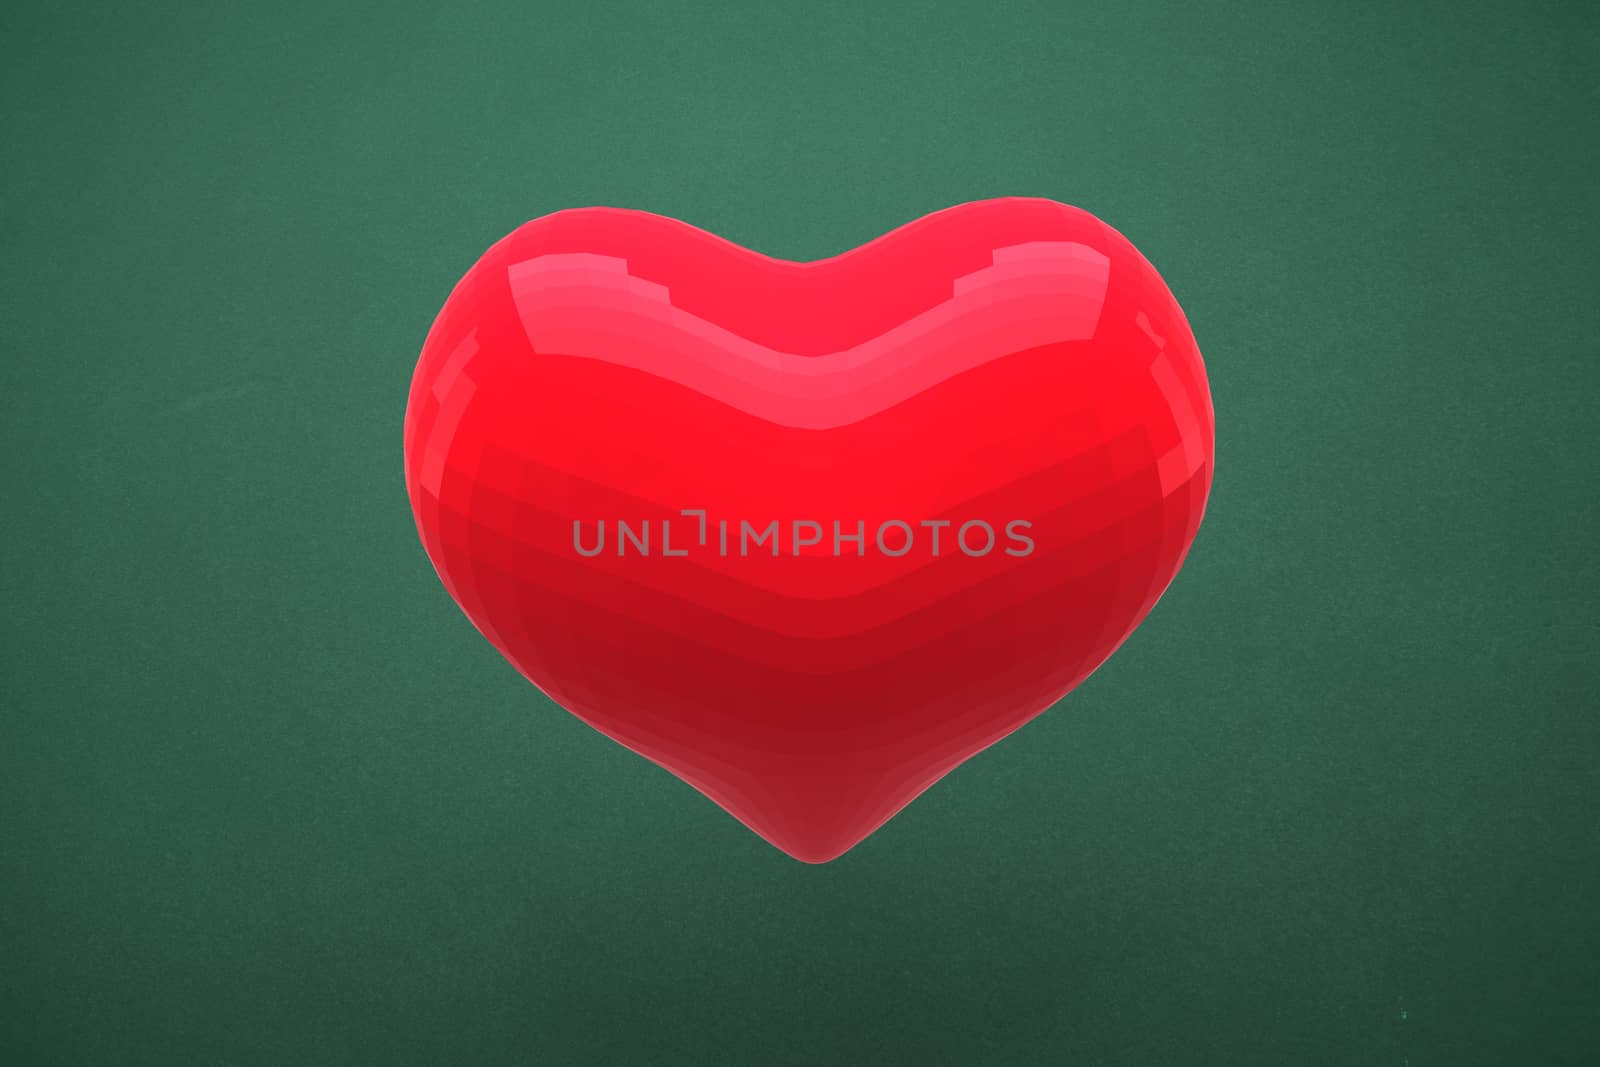 A Red heart against green